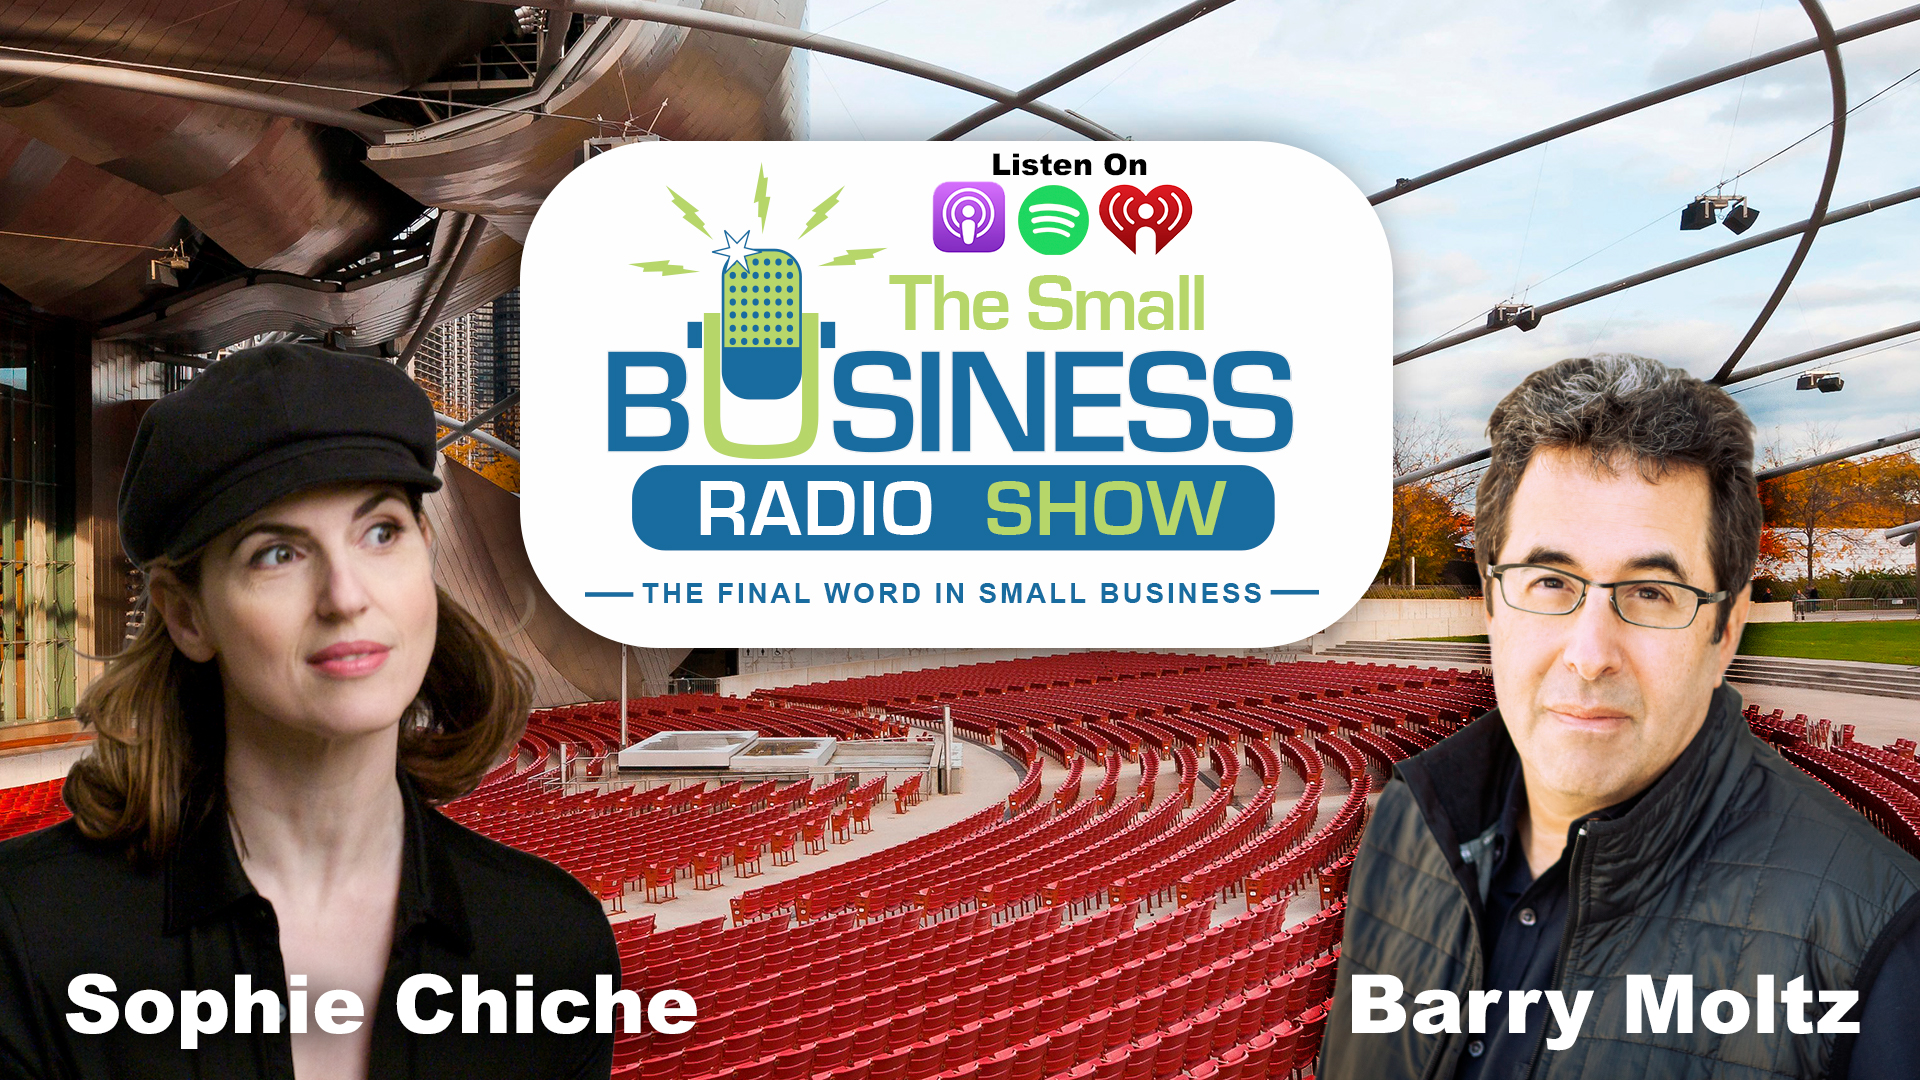 Sophie Chiche on The Small Business Radio Show